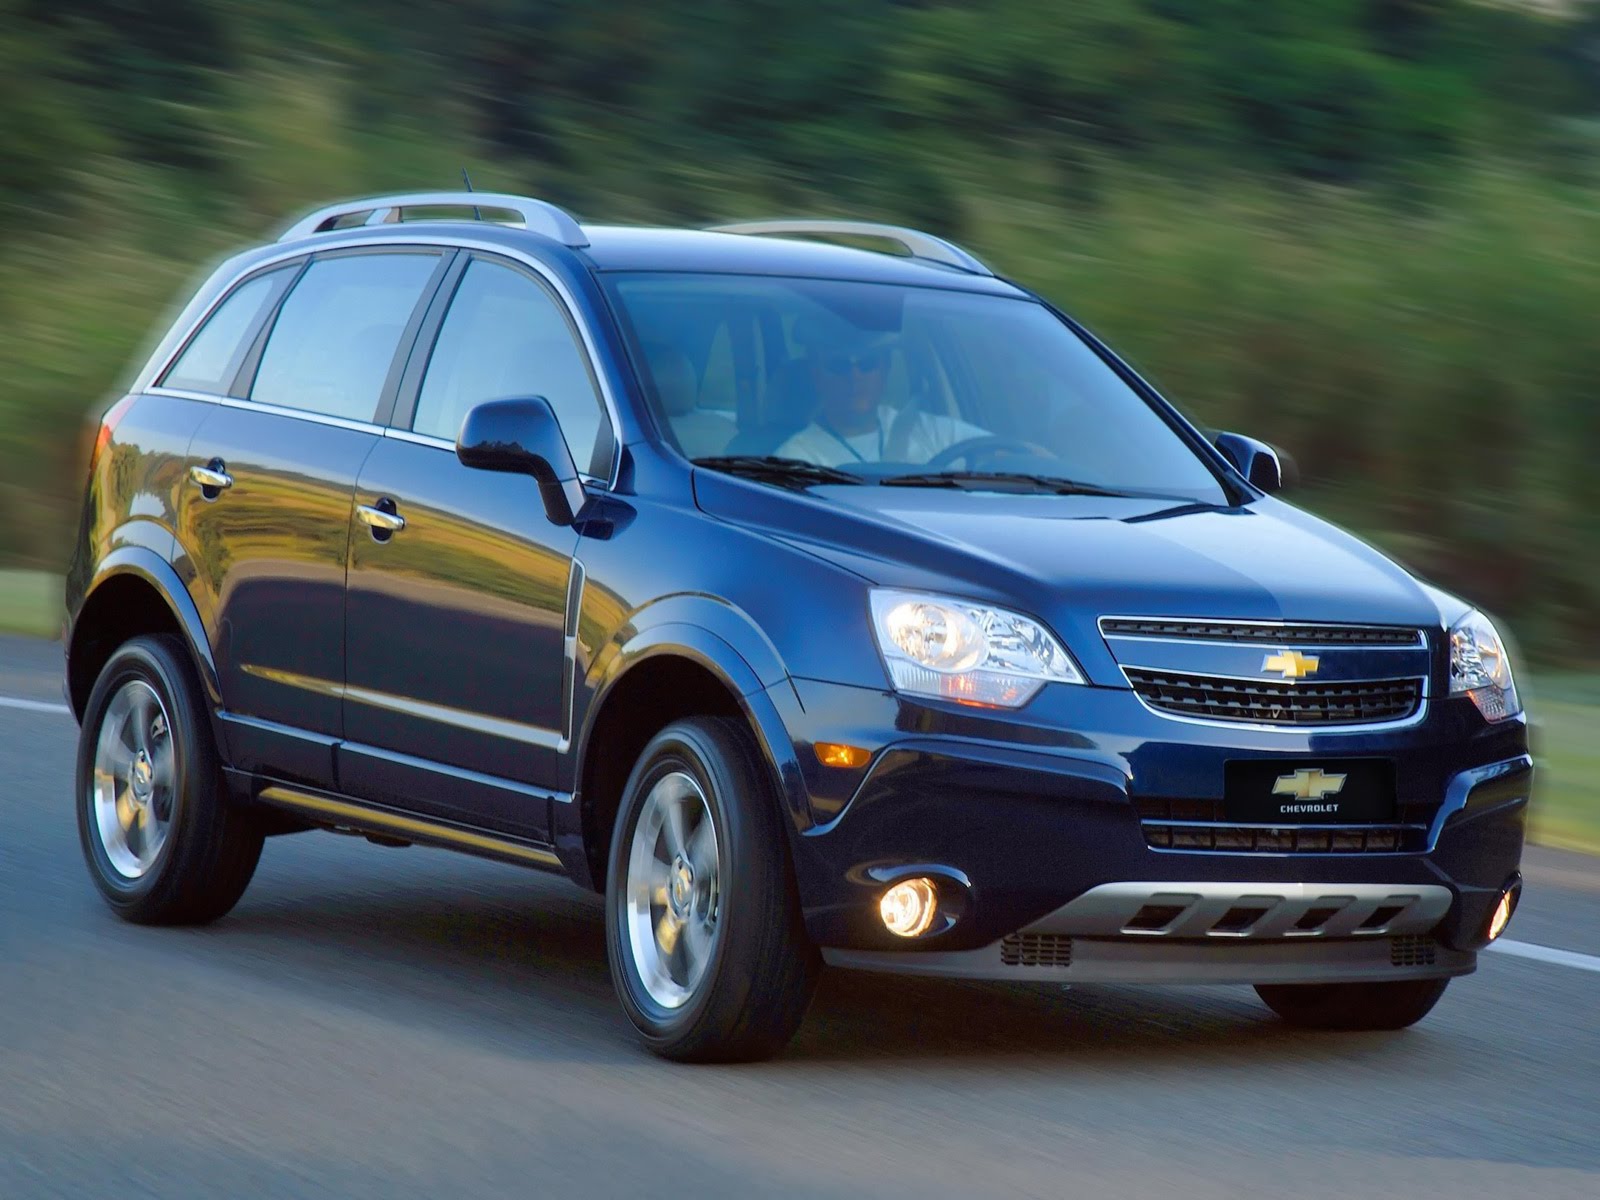 TOP SPEED CAR: + Chevrolet - Captiva offers News and reviews, videos ...